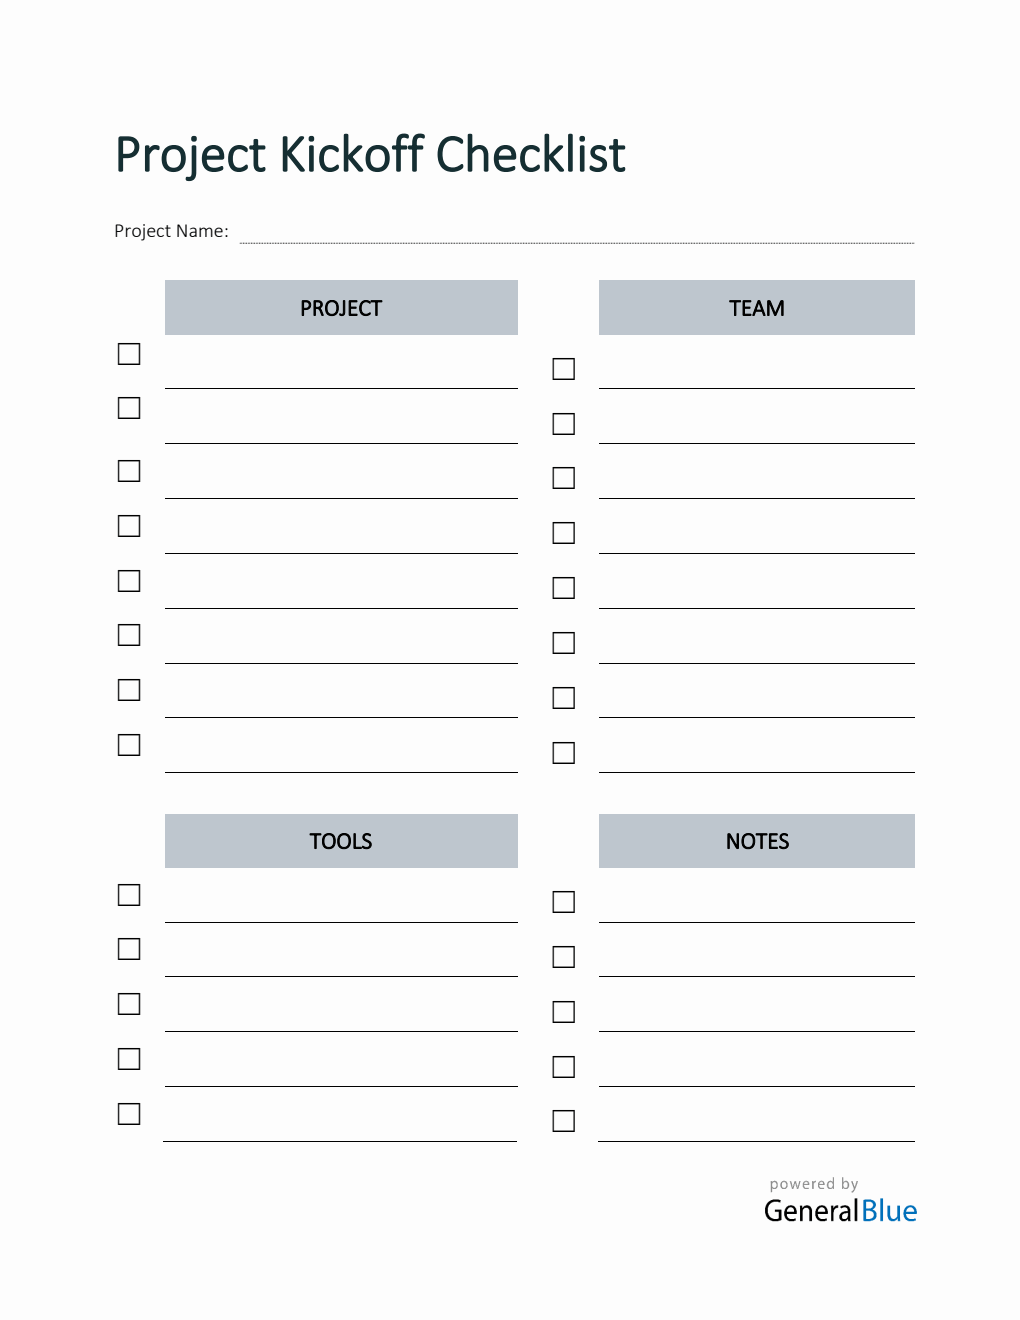 Project Kickoff Checklist in Word